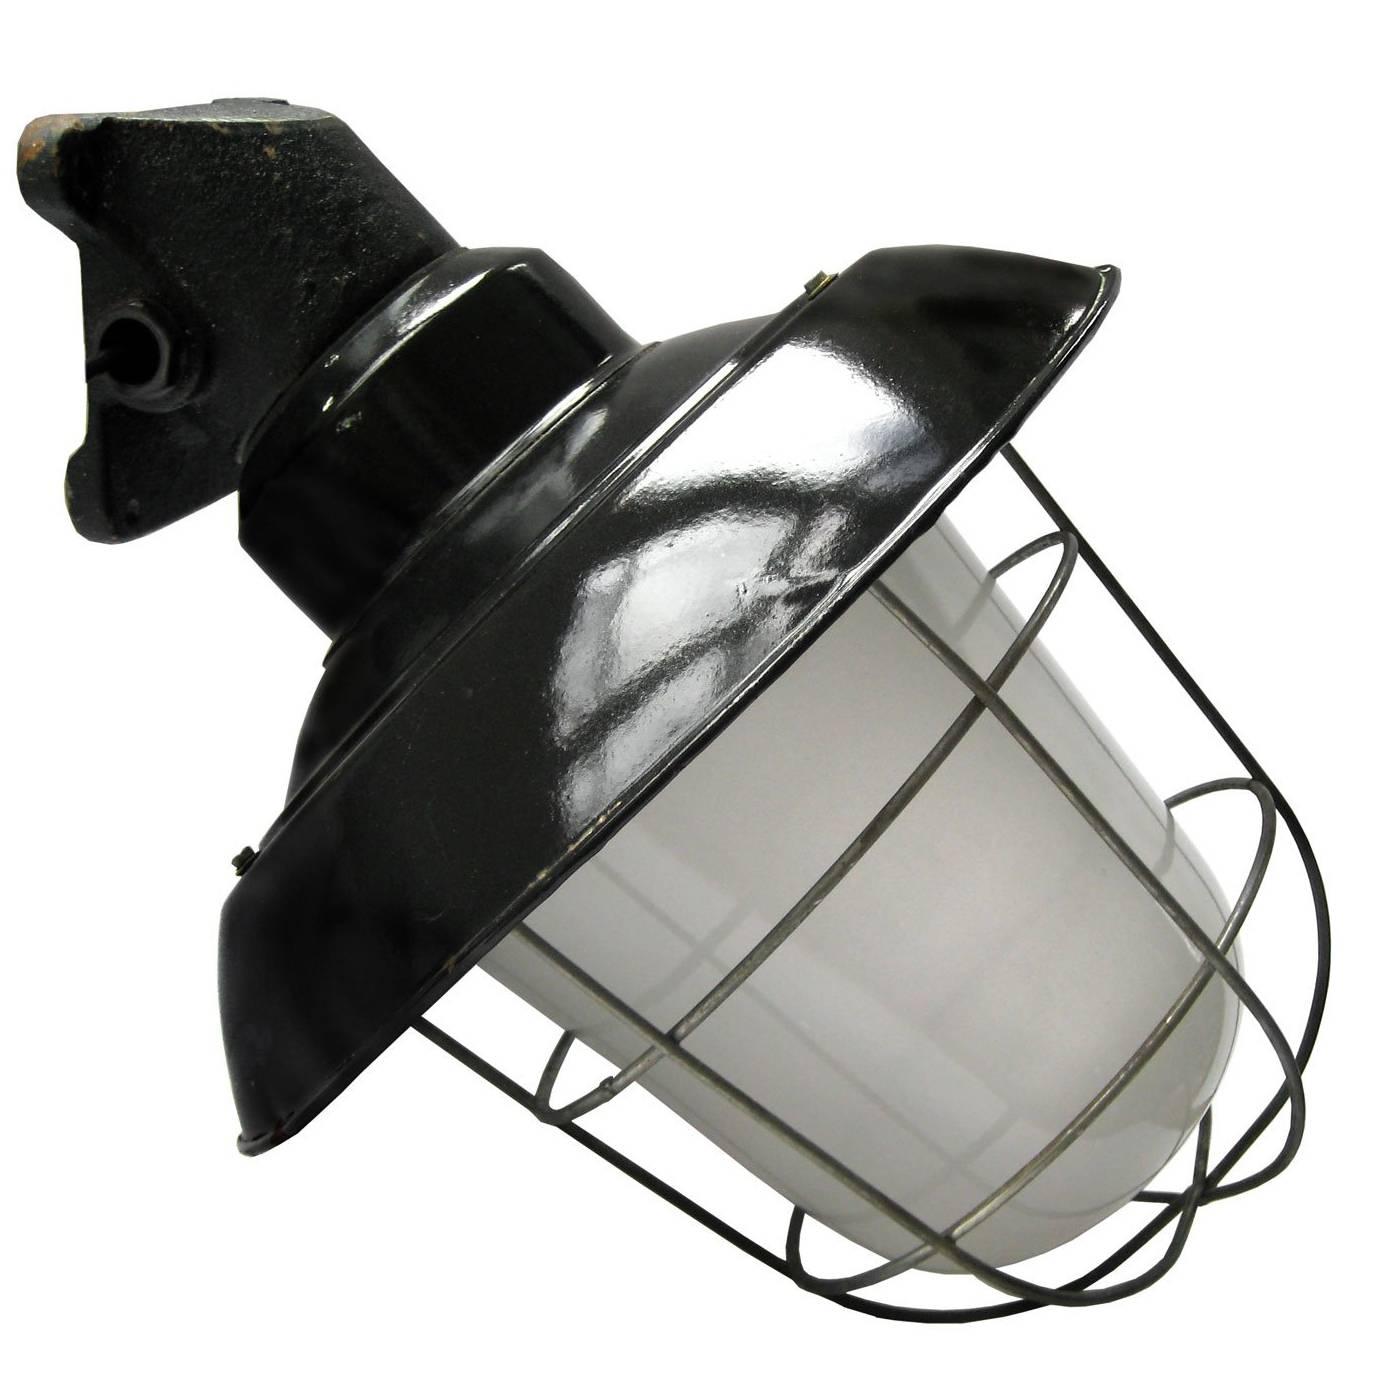 Black Industrial Enamel Cast Iron Wall Lamp Tabor Frosted Glass (7x)